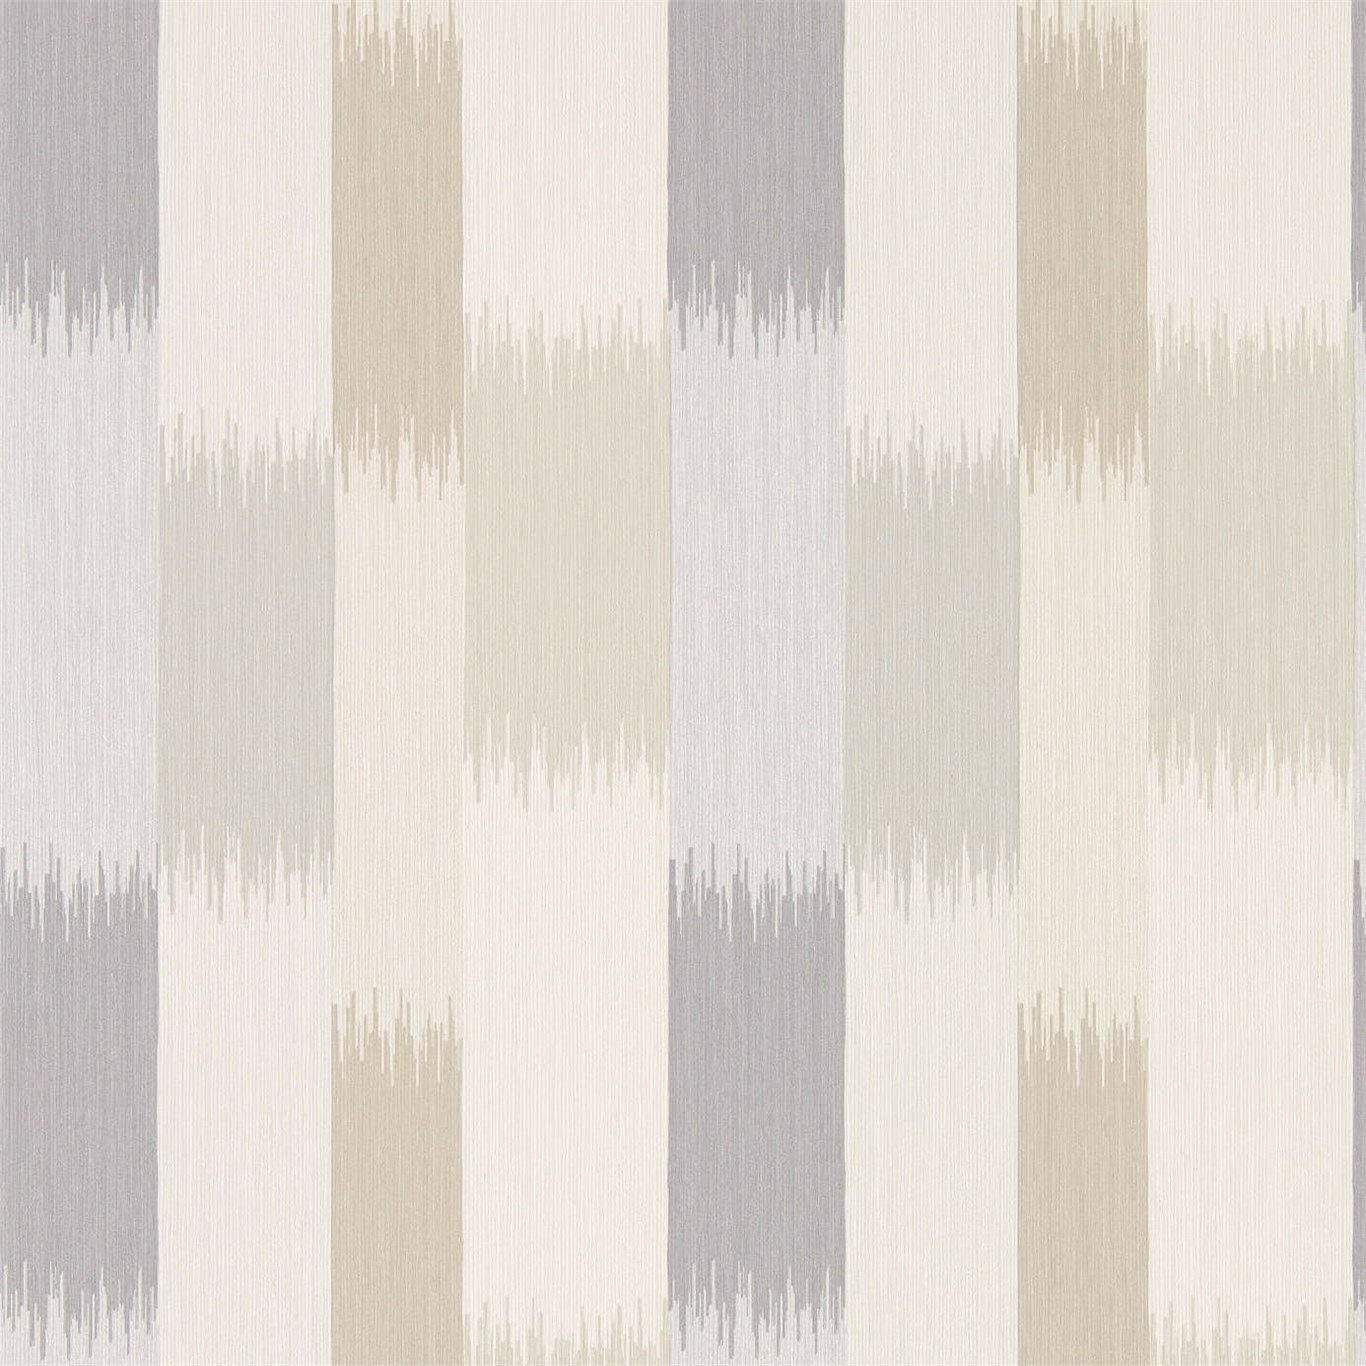 Utto Mist/Fawn/Mulberry Wallpaper by HAR